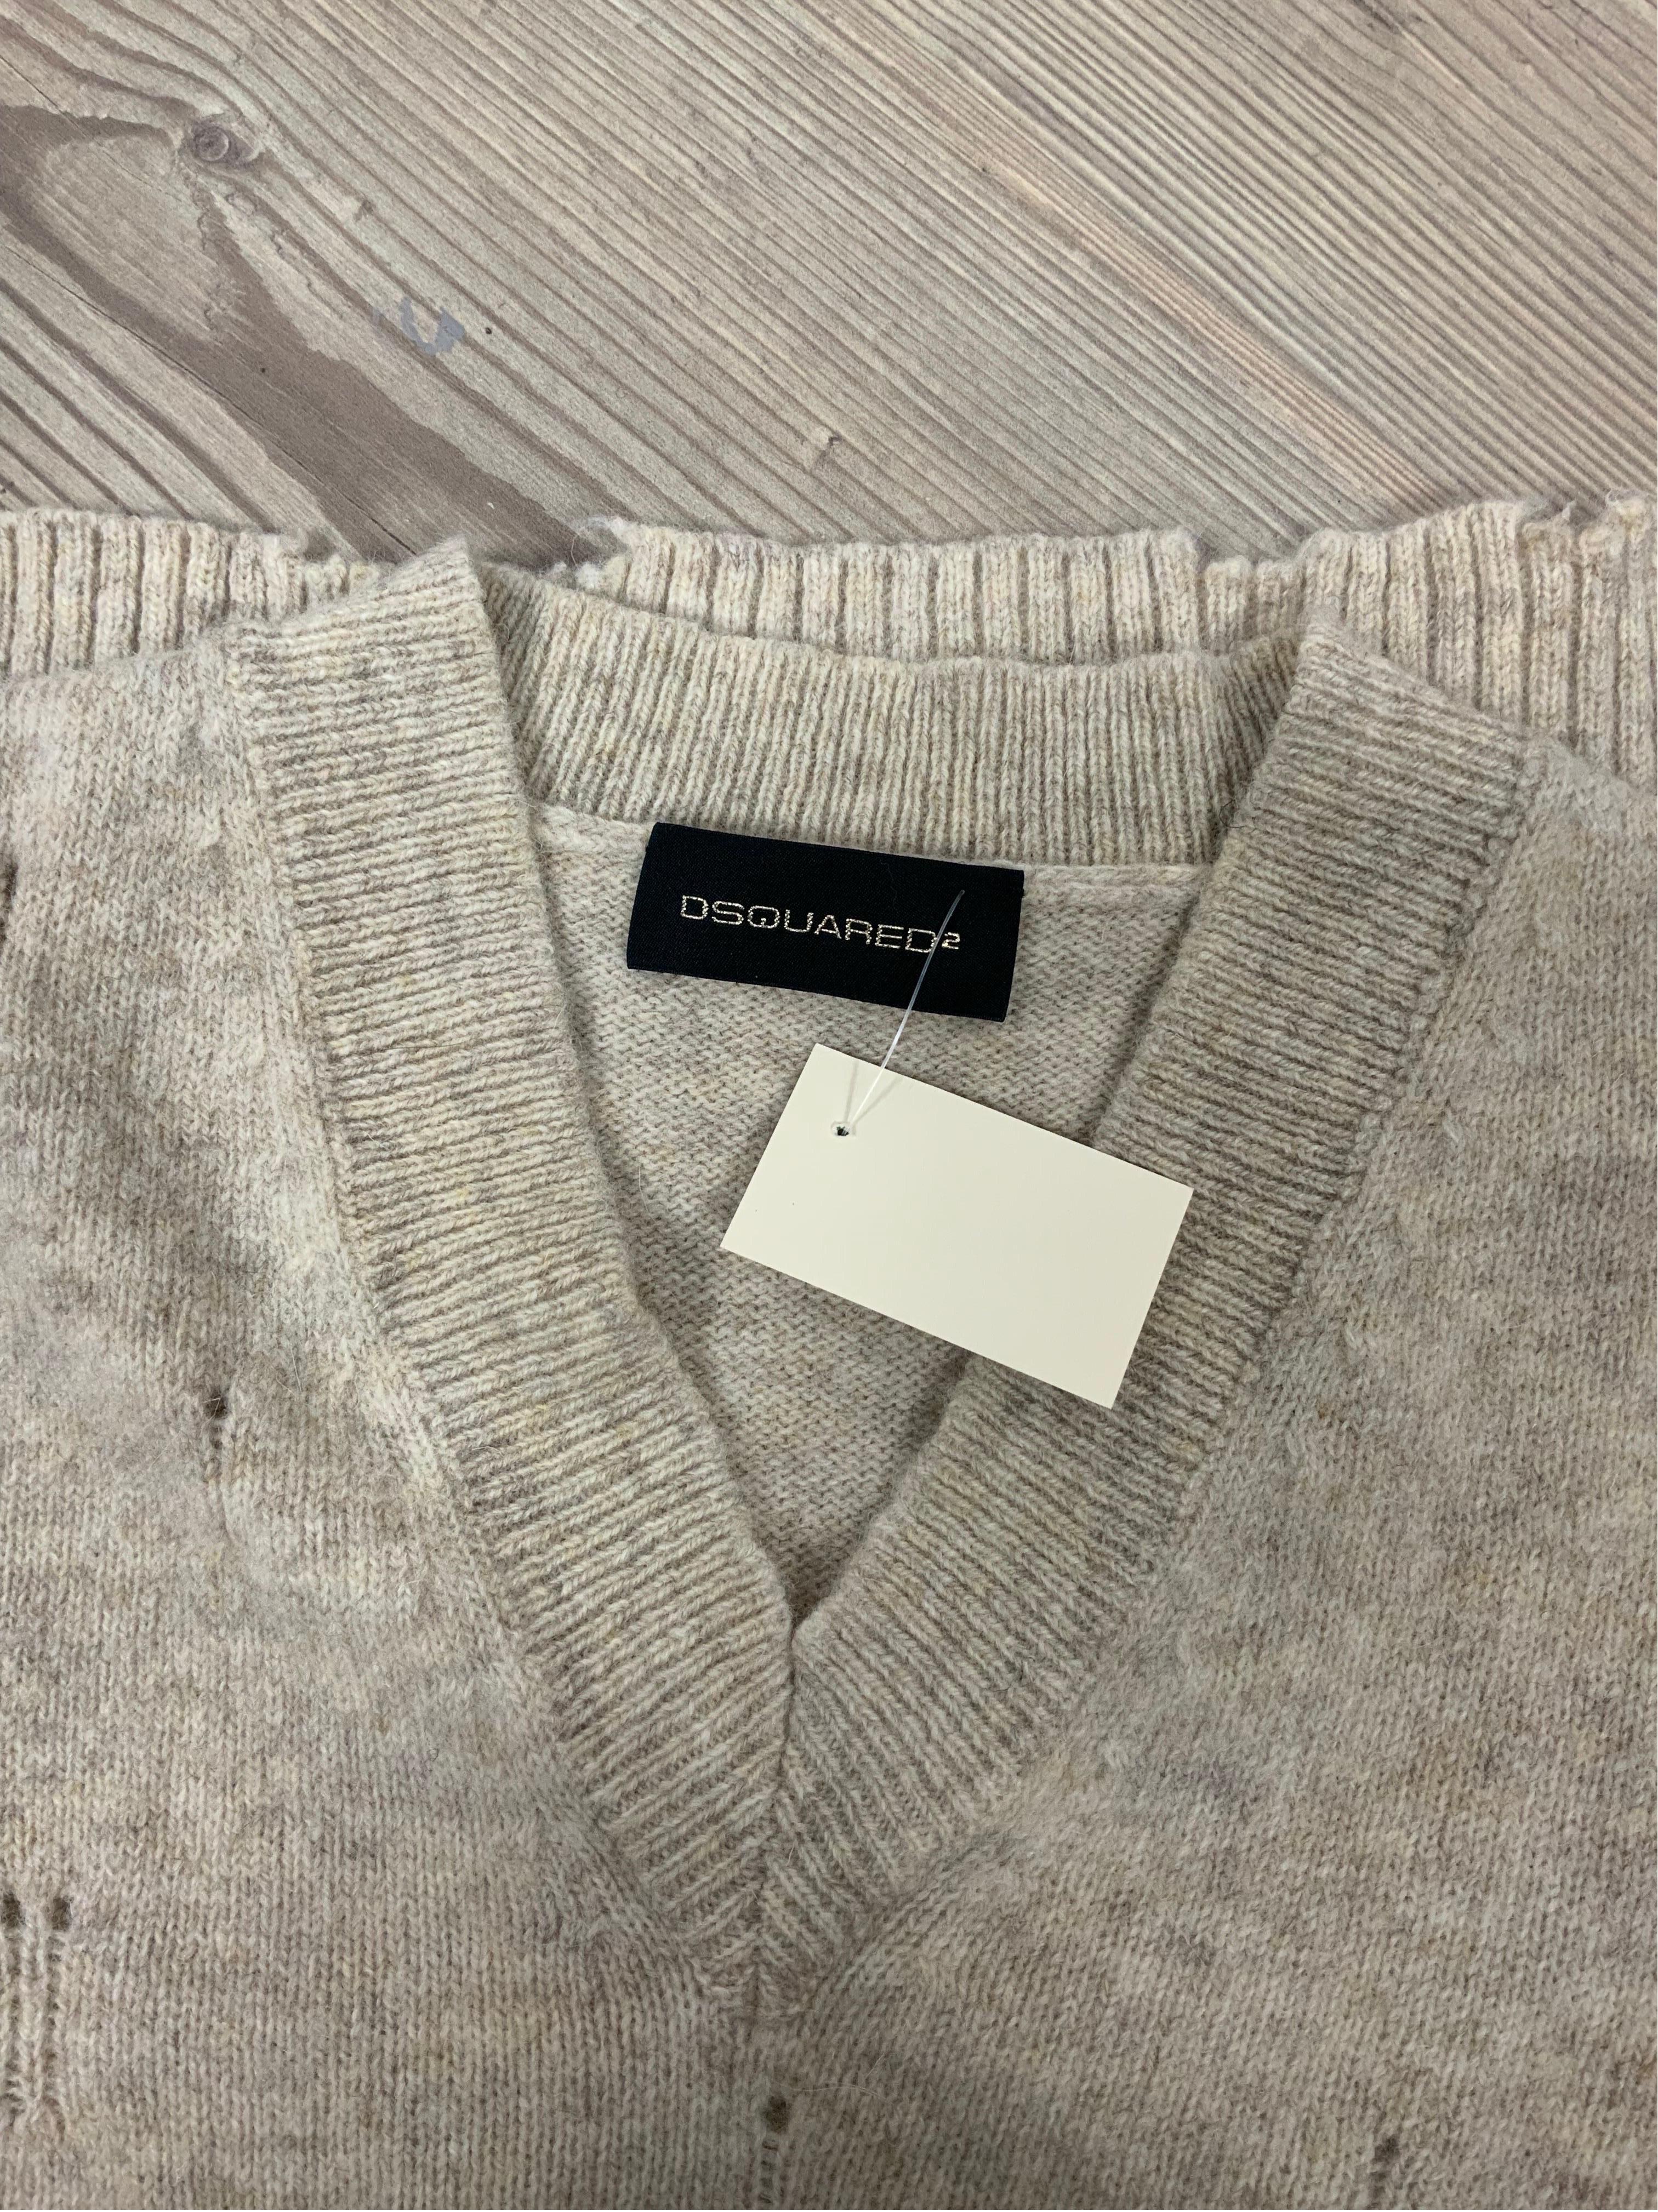 DSQUARED Wool Vest For Sale 1